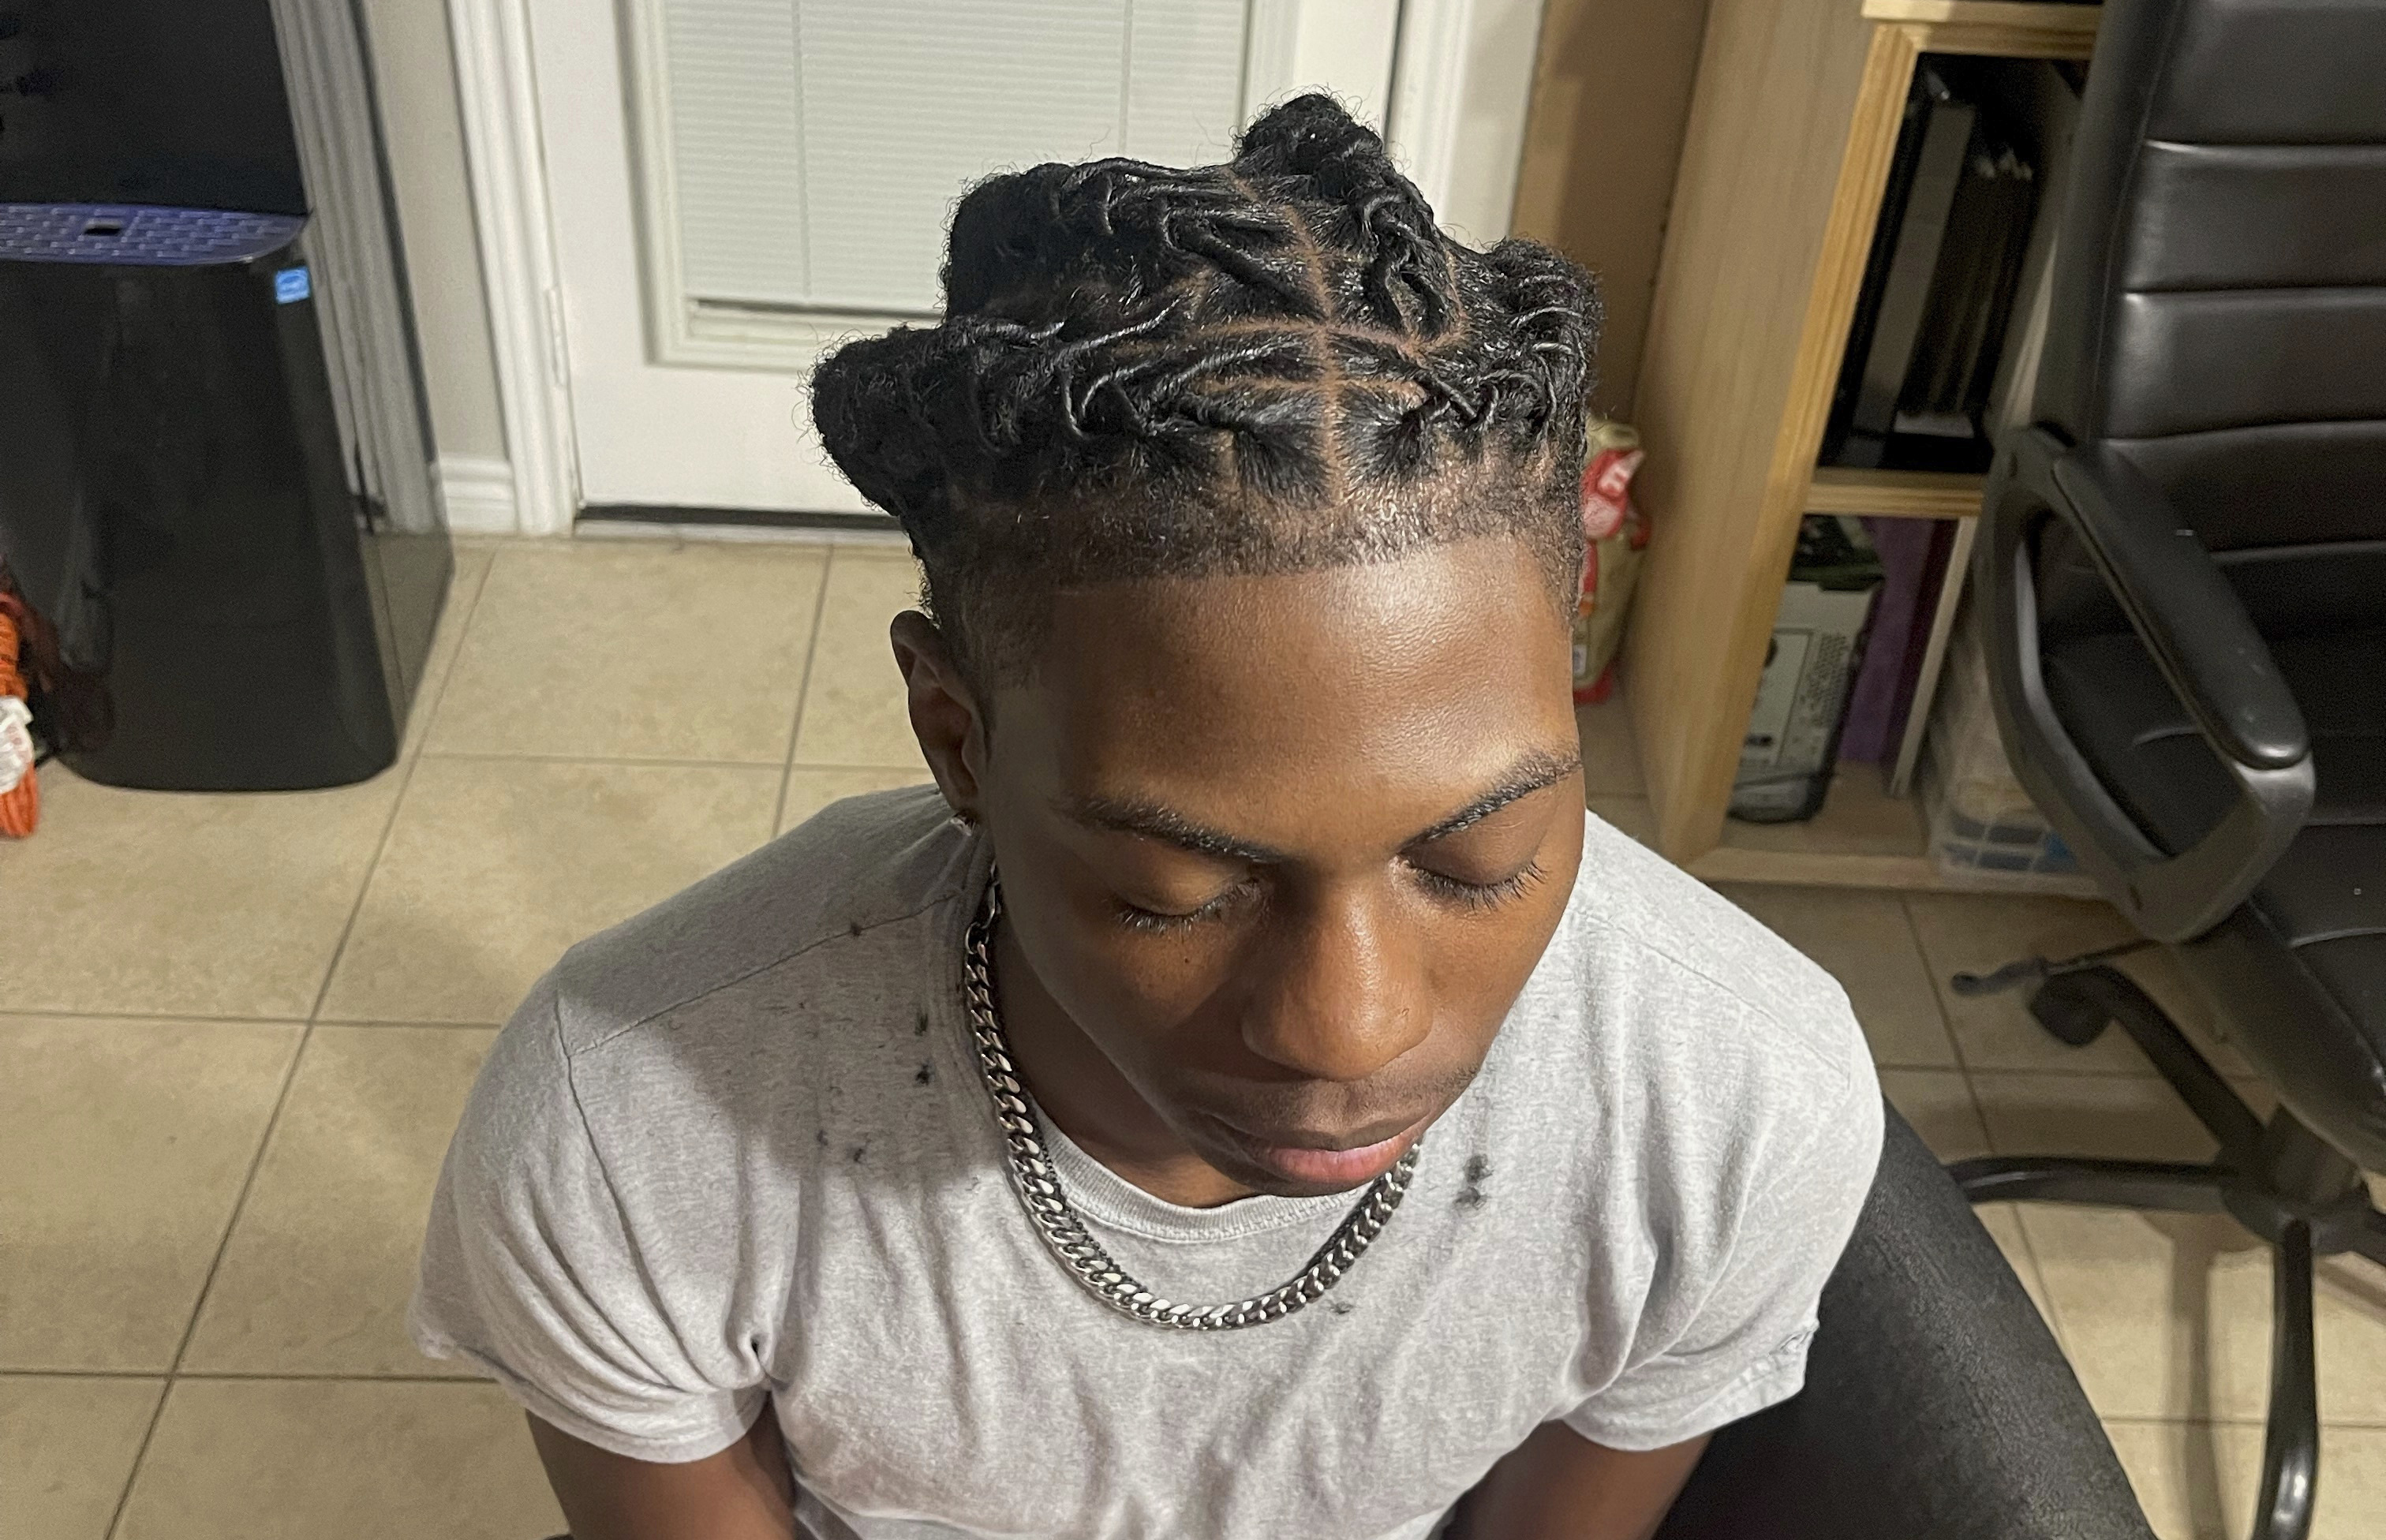 Black Student Darryl George Is Suspended Over Locs Again - The New York  Times